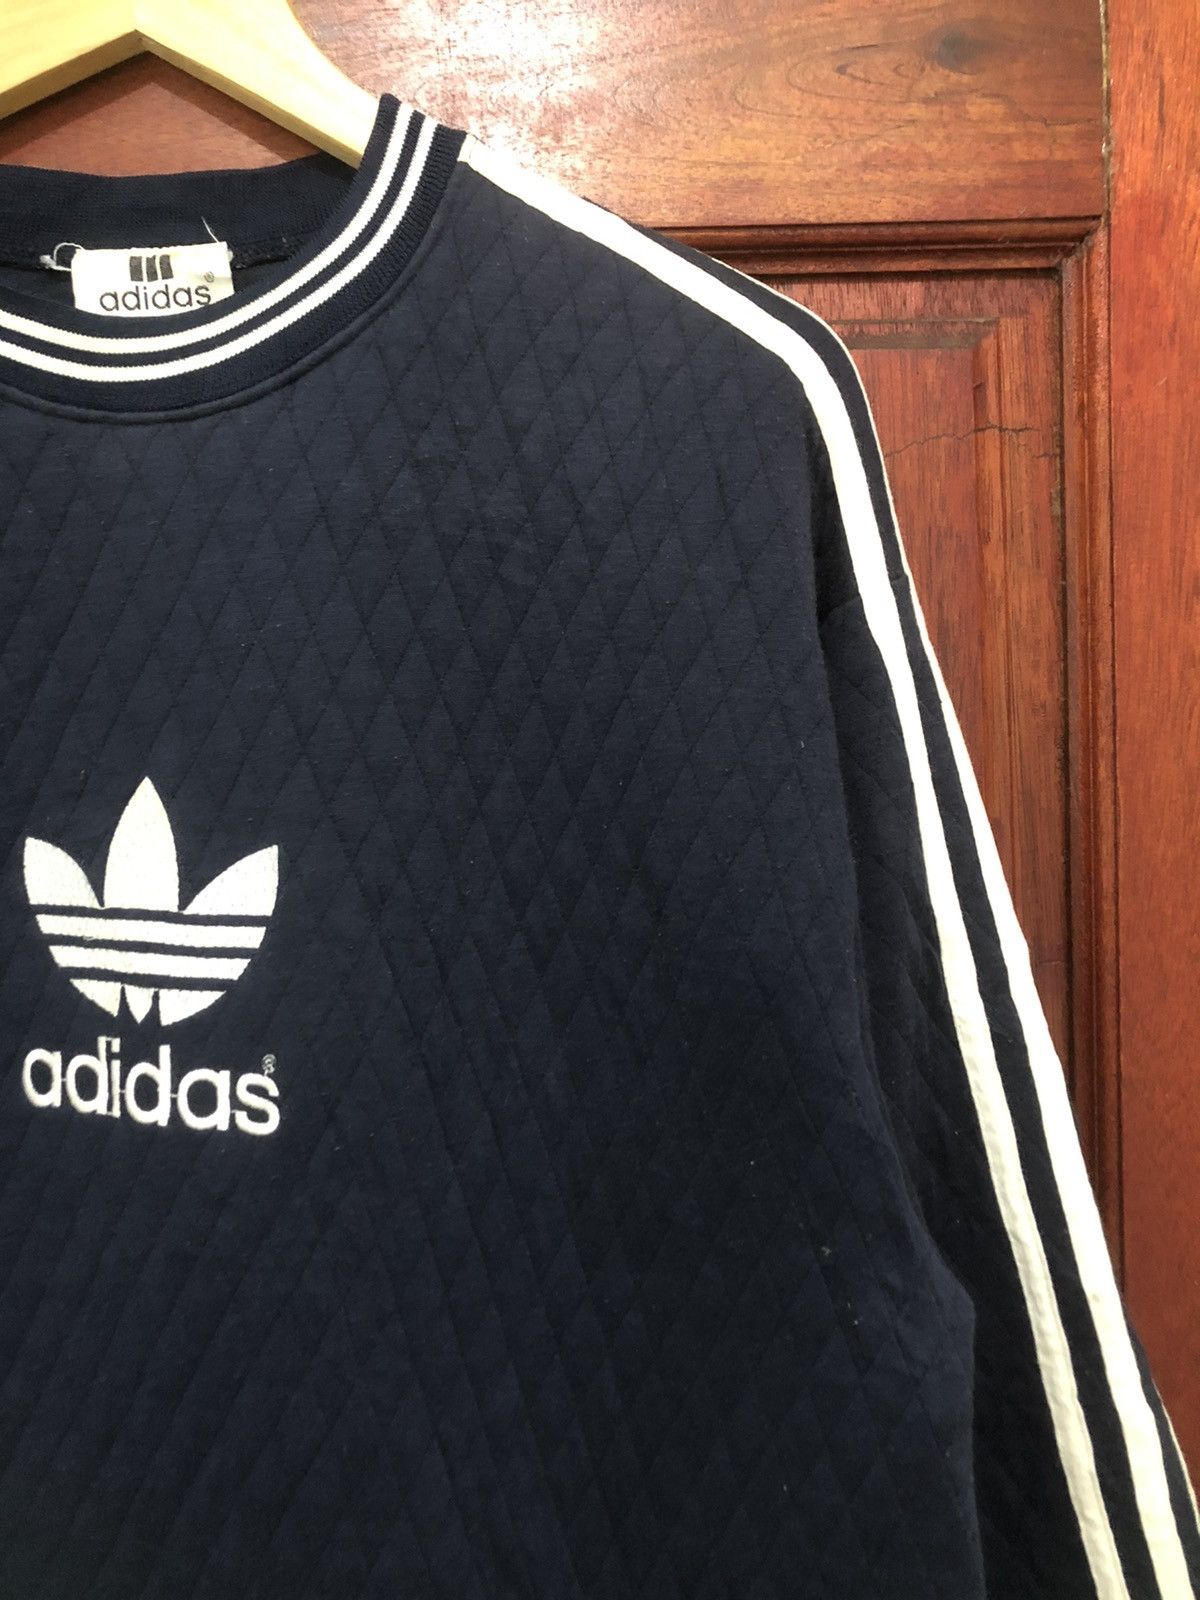 Vintage Adidas Quilted Embroidery Trefoil Sweatshirt - 4